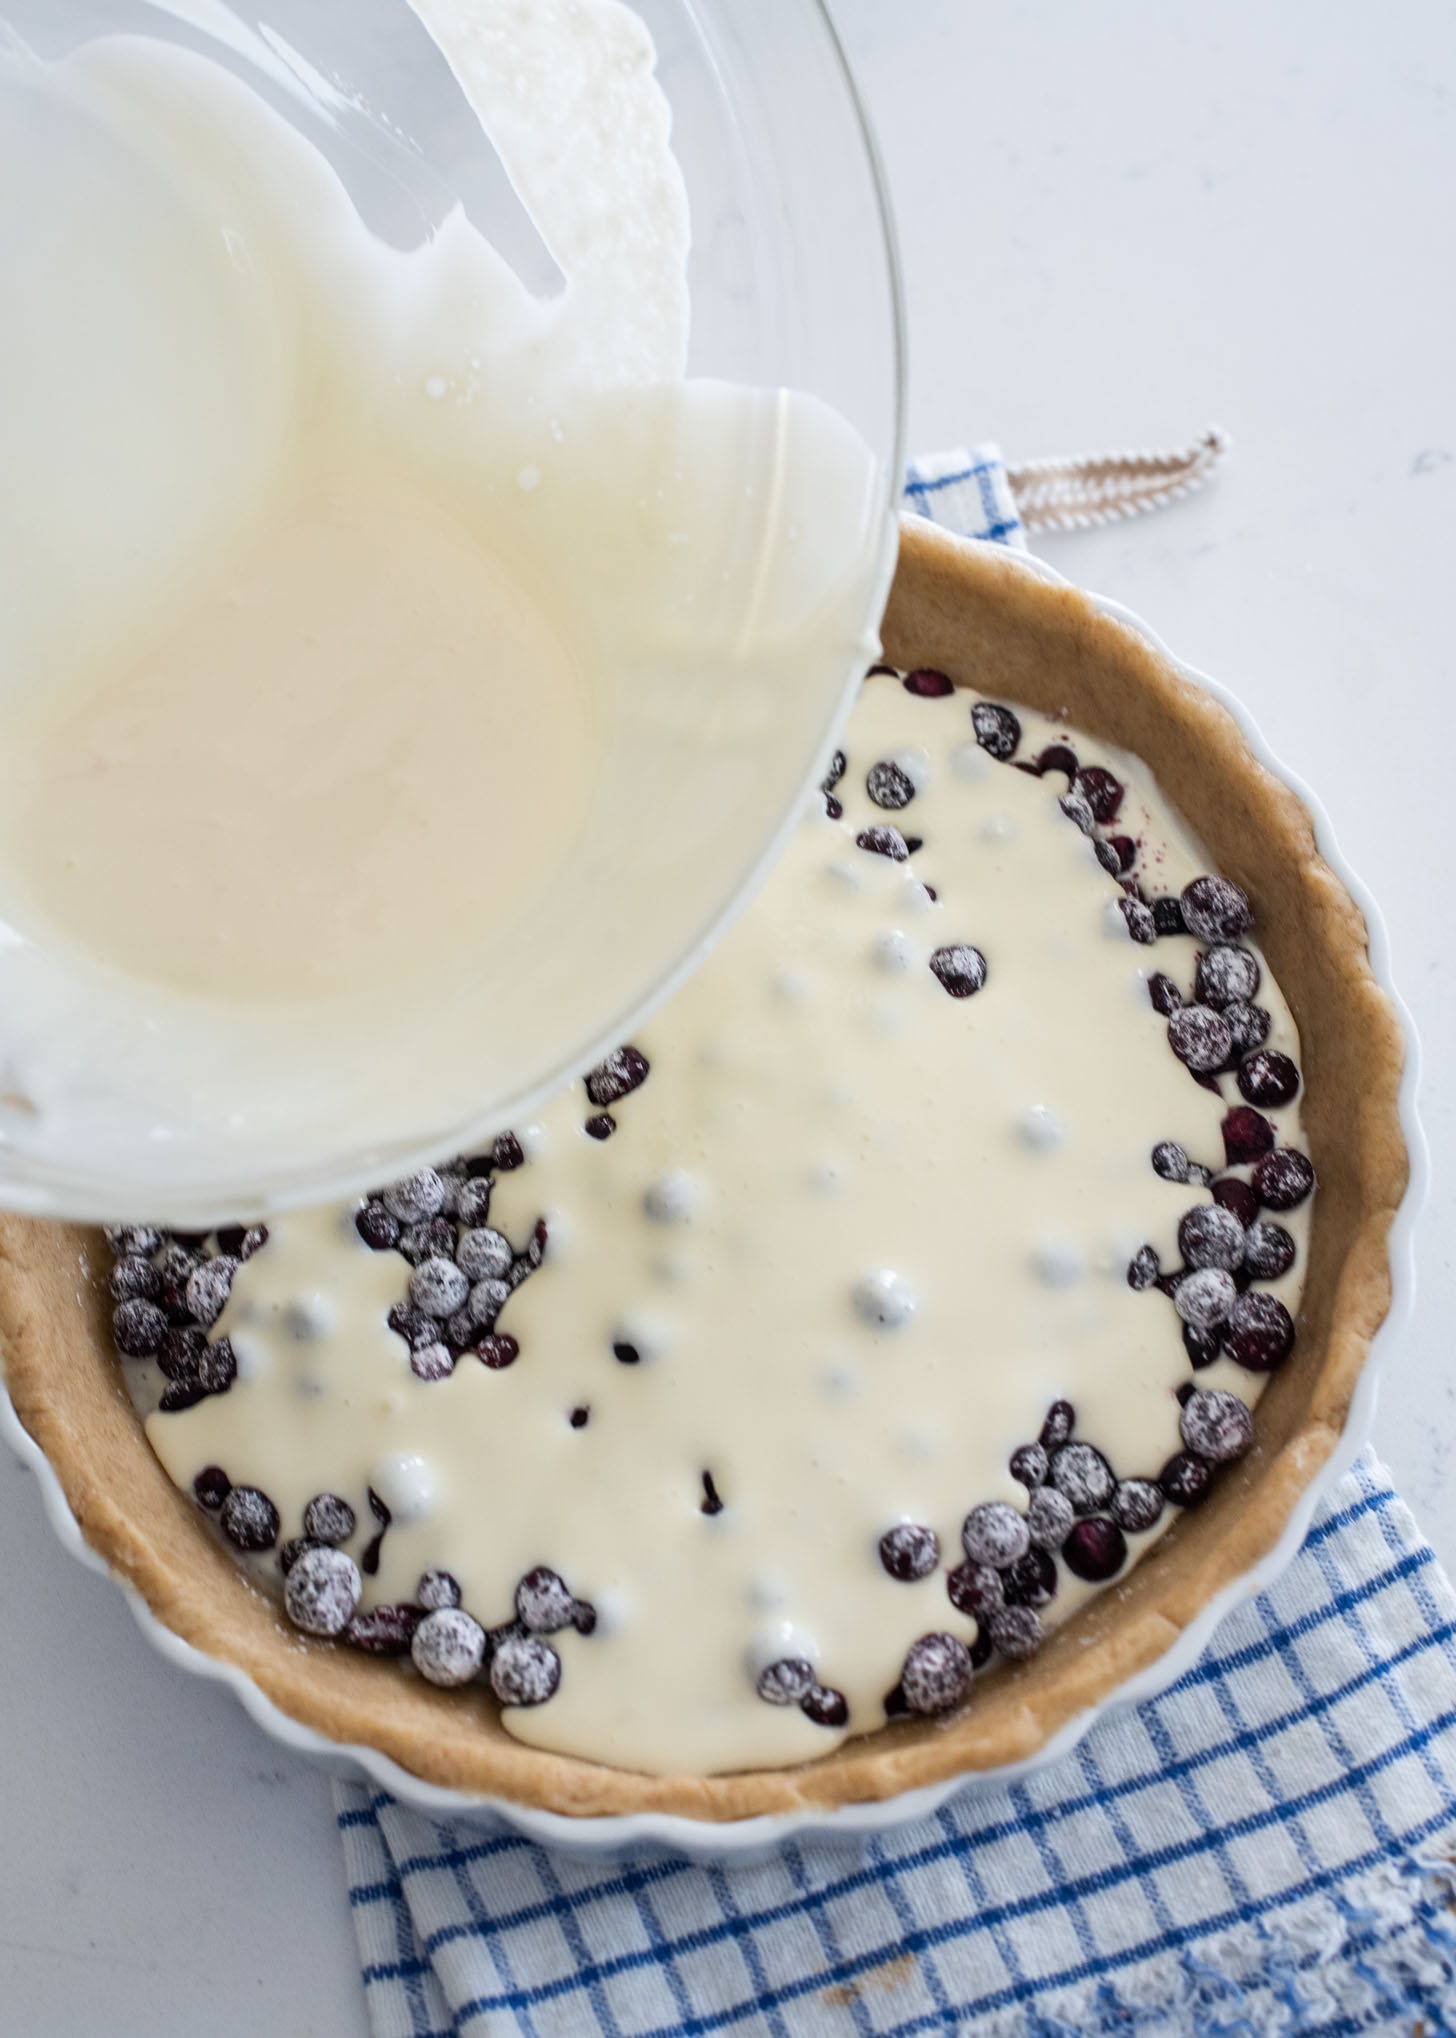 Remaining cream filling being poured over the blueberries in a pie crust.